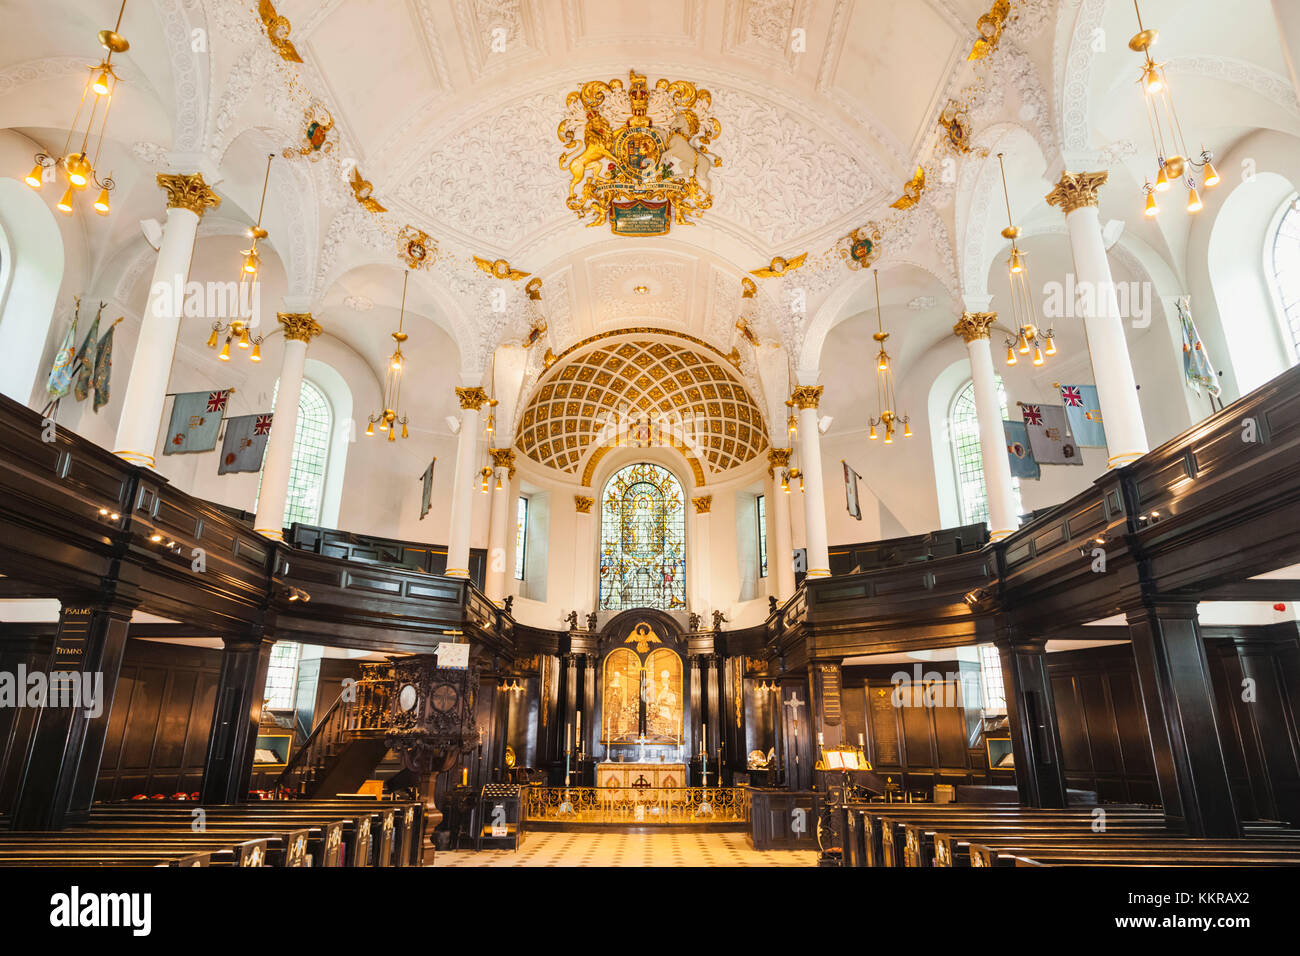 England, London, The Strand, St Clement Danes Church, Interior View Stock Photo